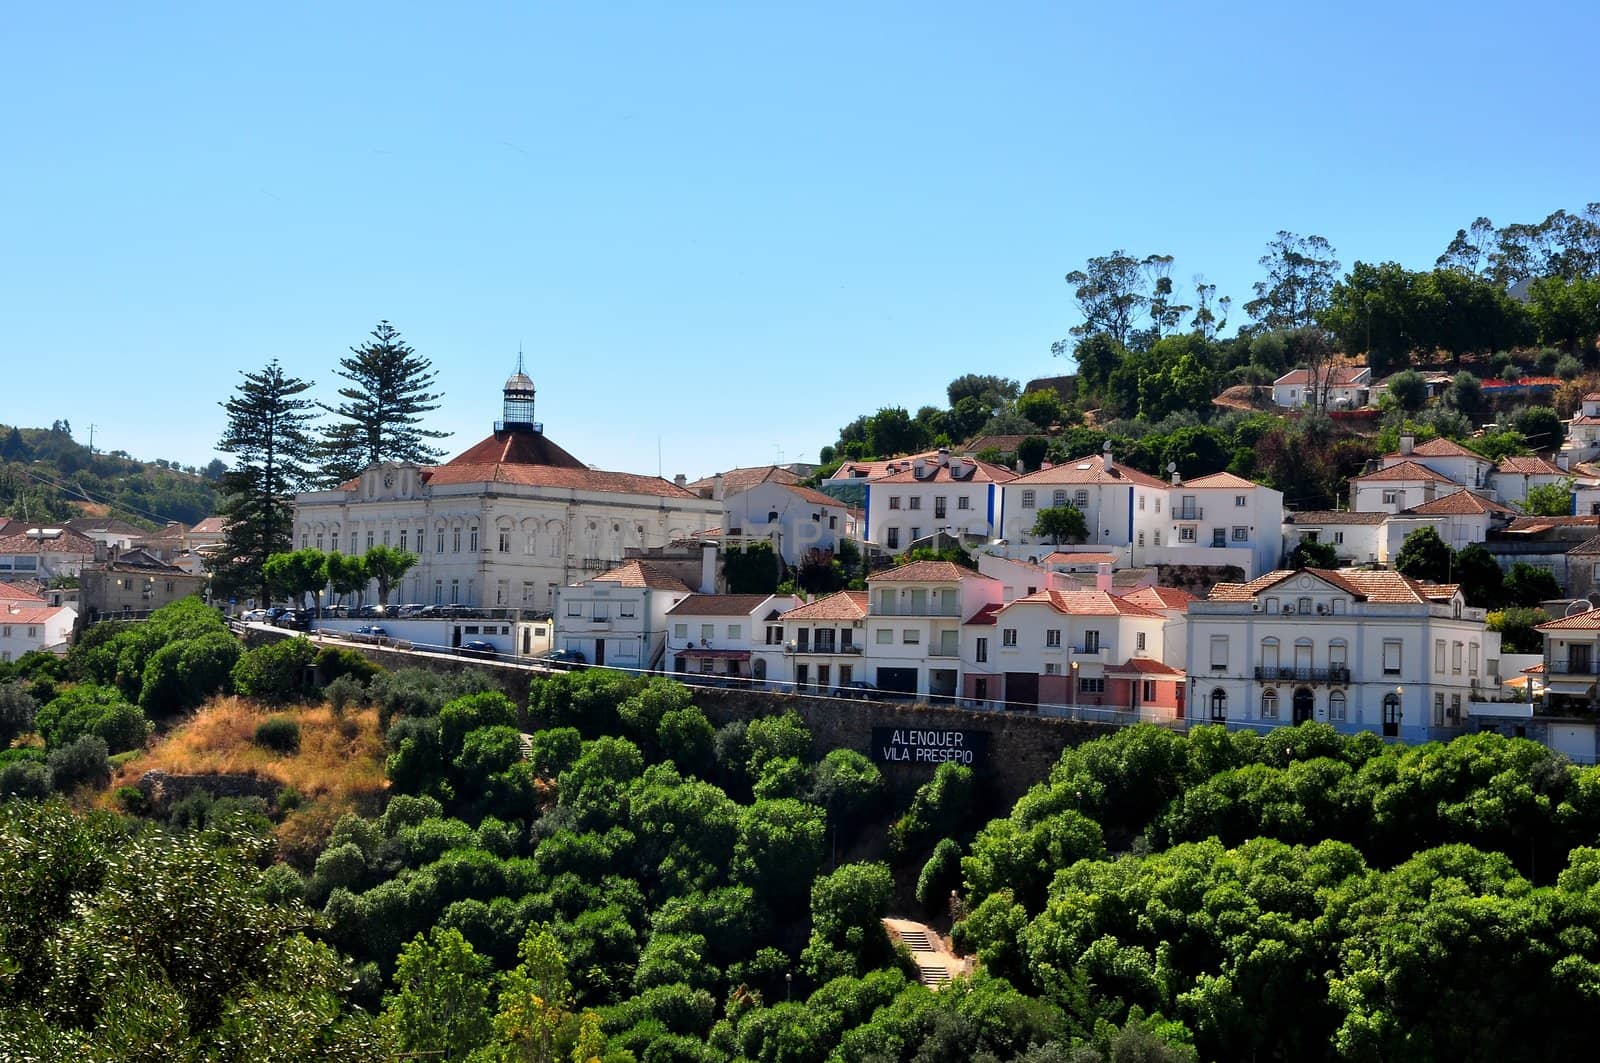 Old town,village on the hillside in Portugal by vas25